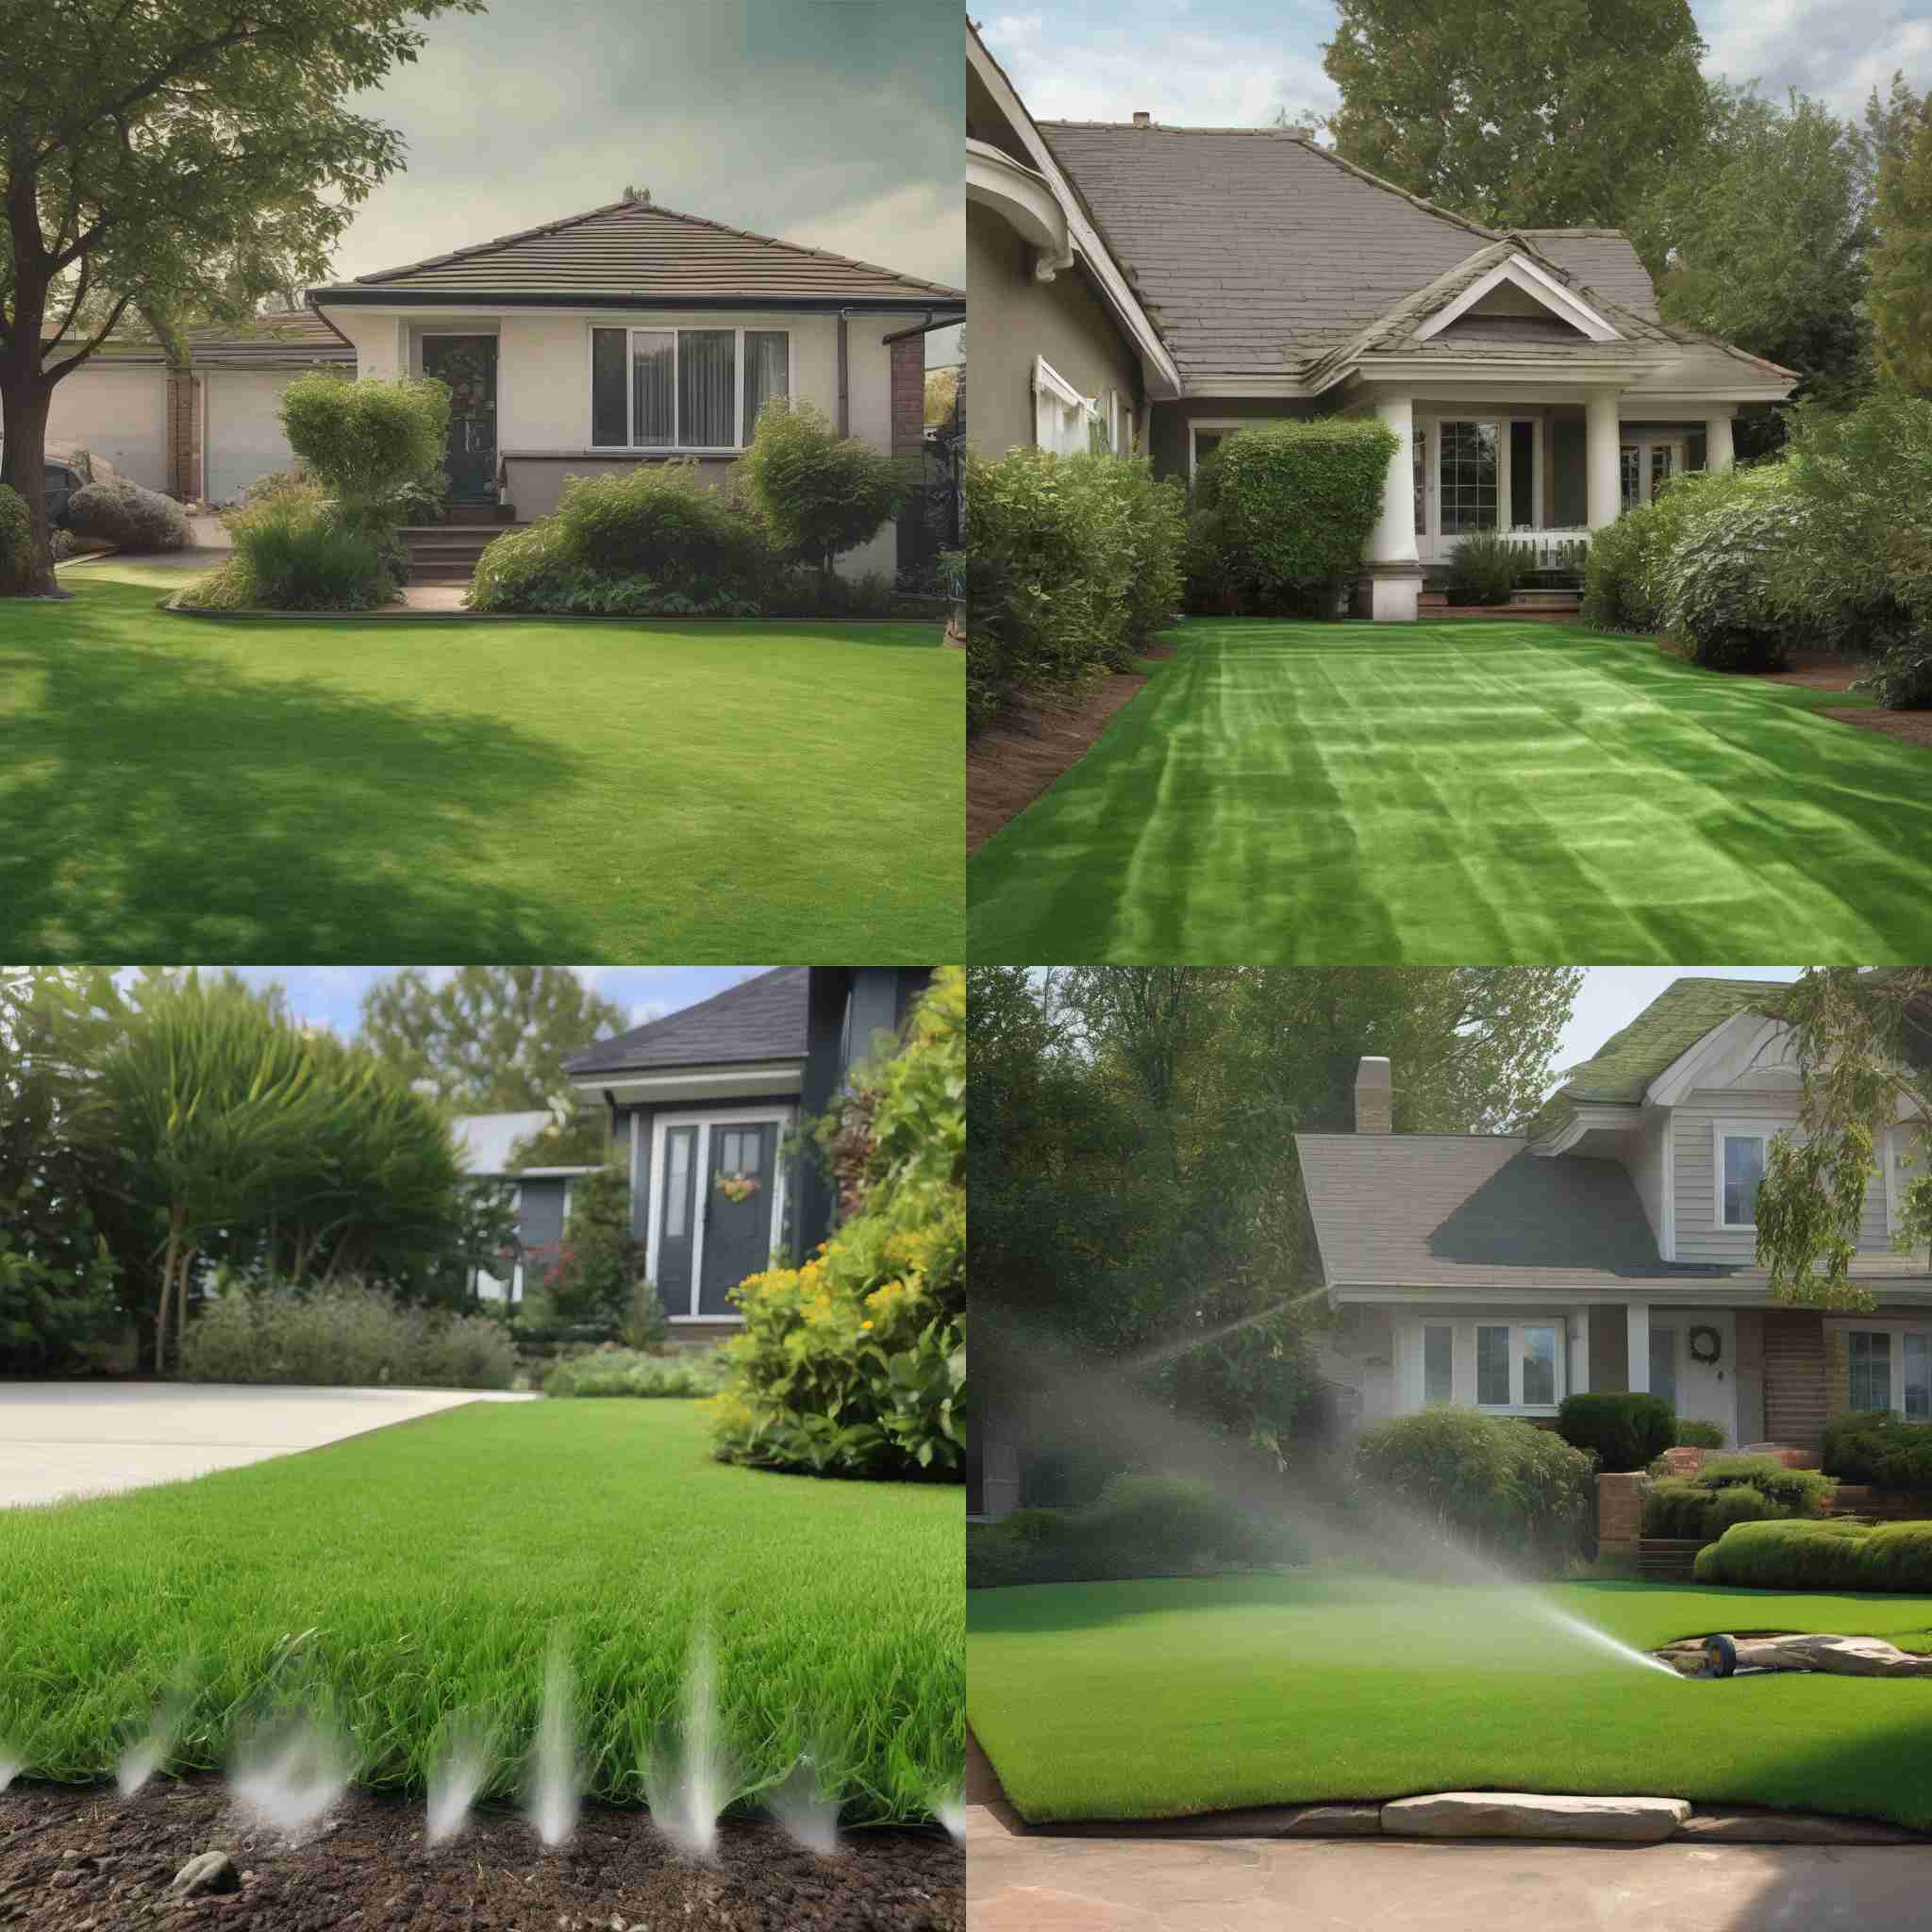 A regularly watered lawn